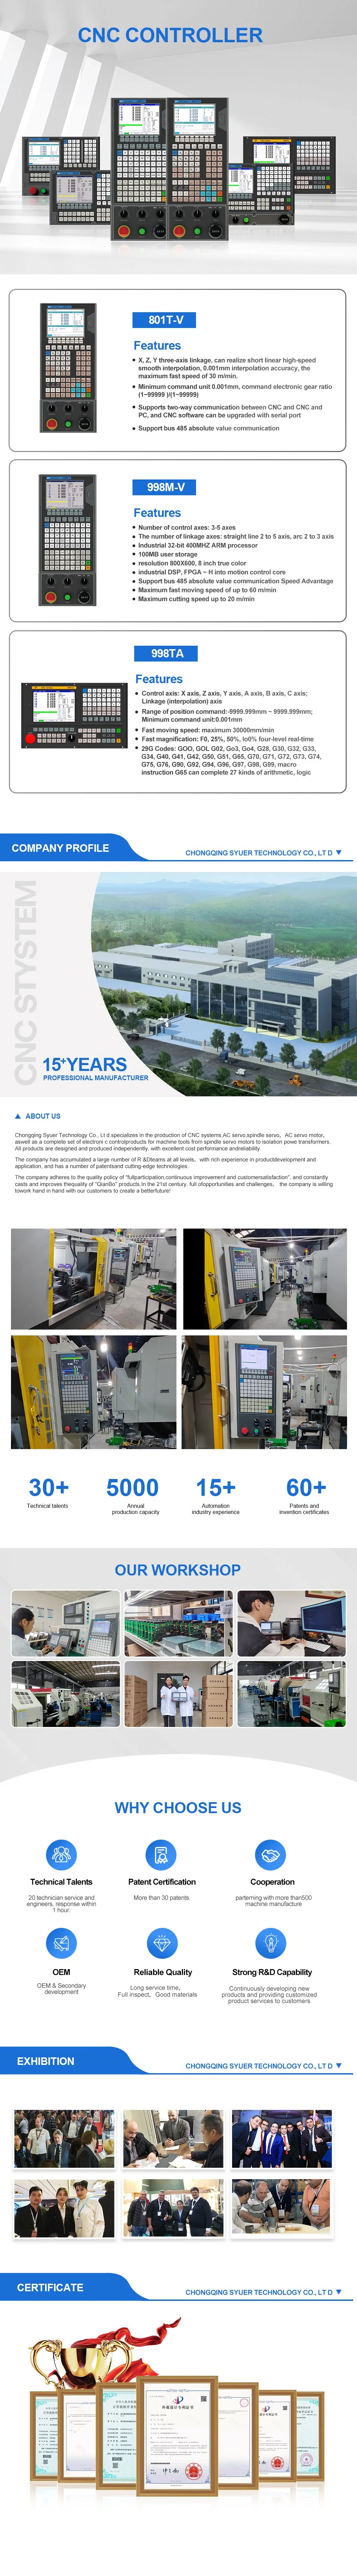 Cheap Price 998t-V 2 Axis CNC Lathe Turning Cutting Machine Control Mini System with PLC Router Center Machine Tools Controller